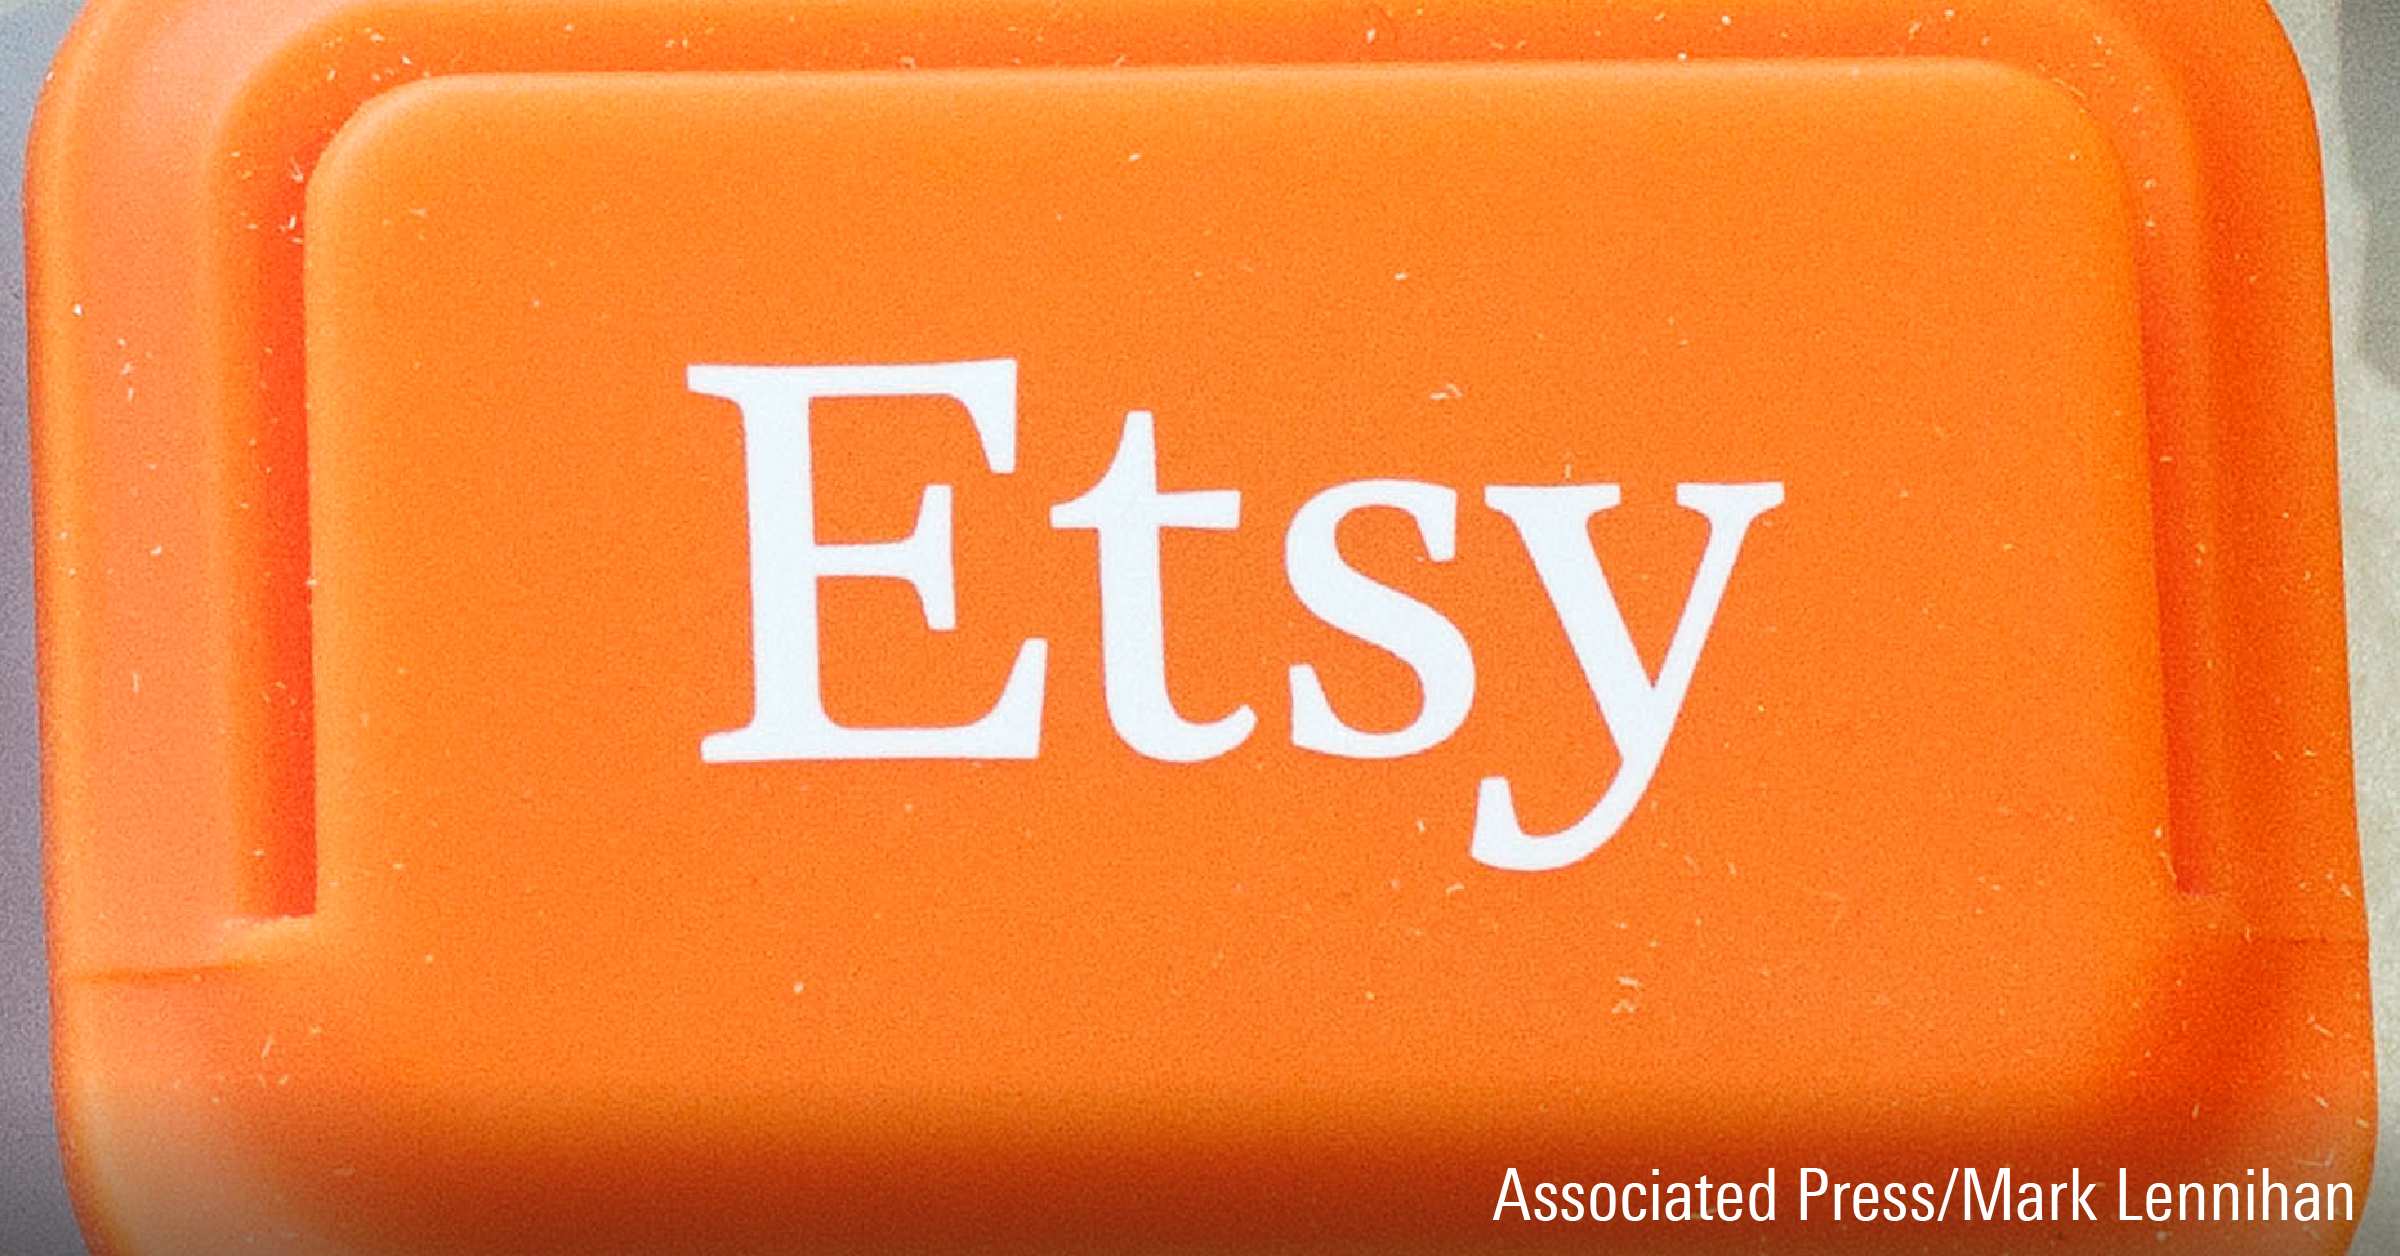 Etsy logo is shown on an Etsy mobile credit card reader.